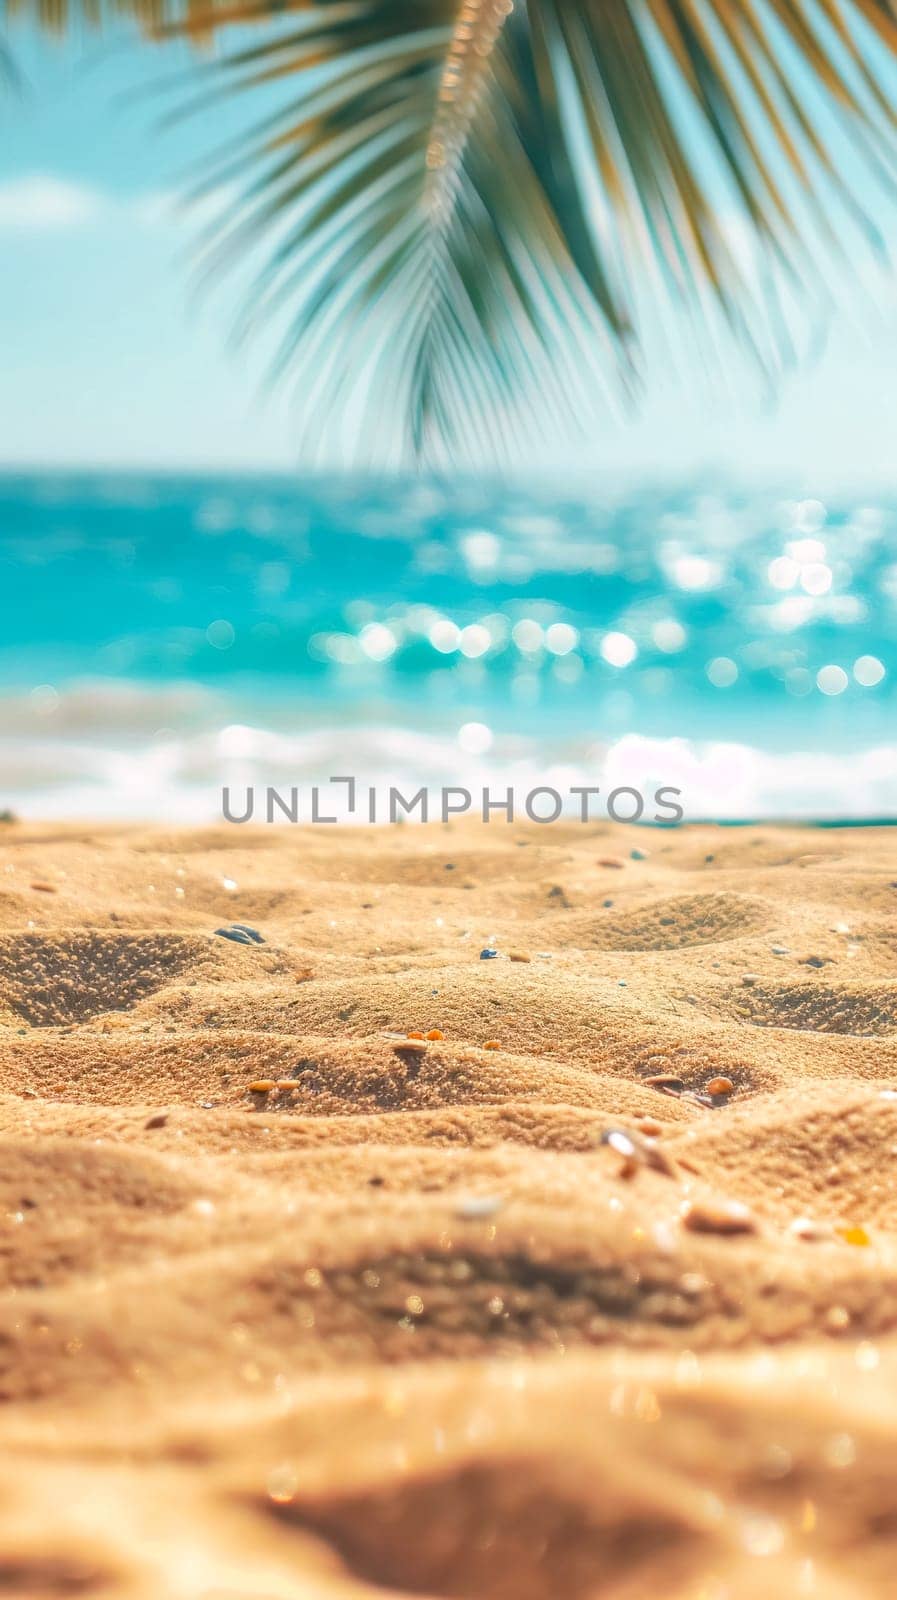 A tranquil beach scene with a foreground of golden sand leading to a softly focused turquoise sea under the shade of palm leaves, inviting relaxation and leisure by Edophoto